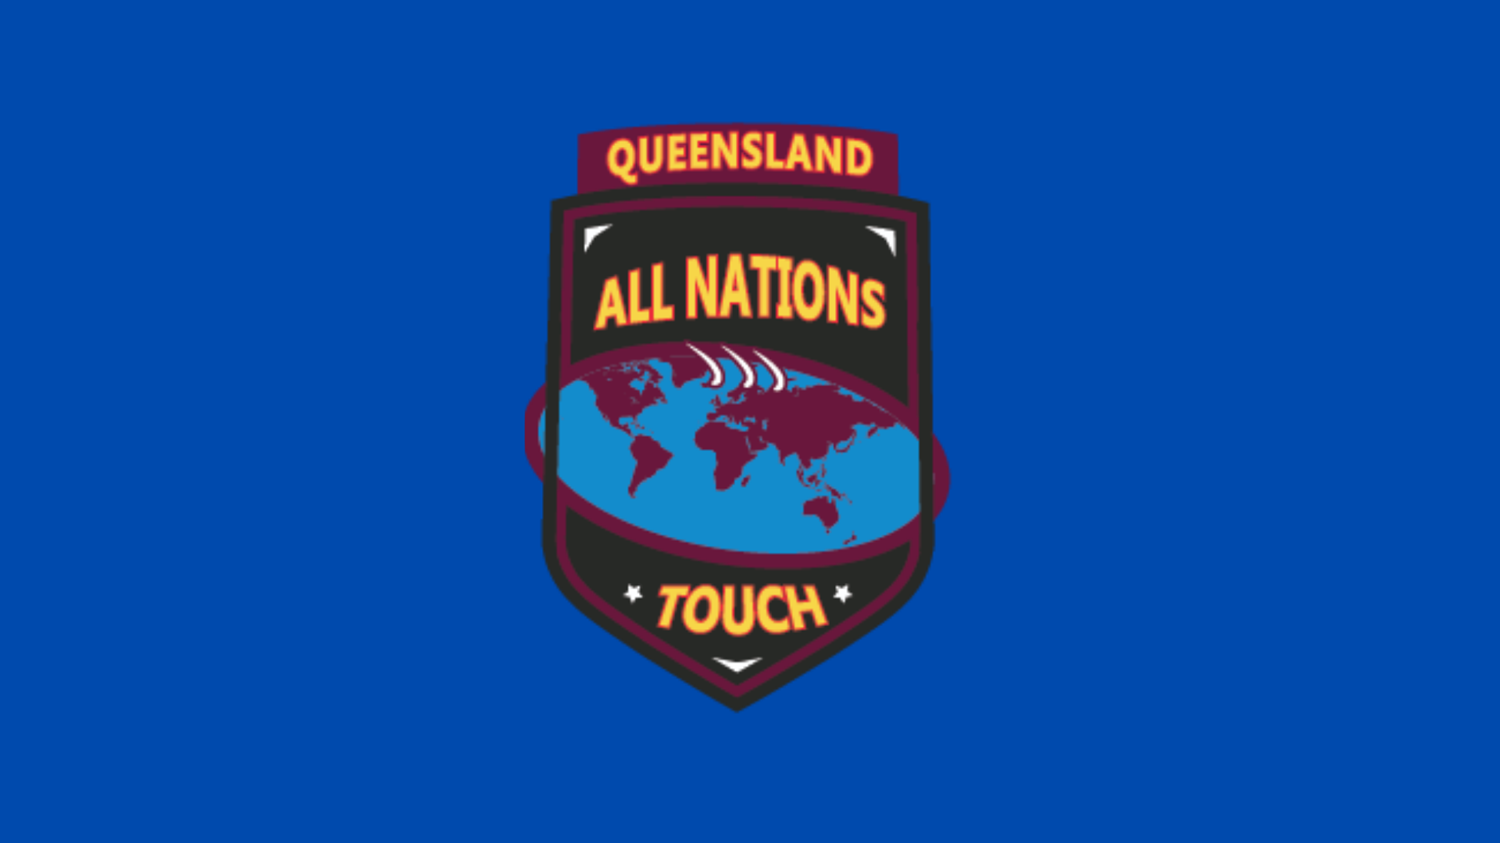 221203-QLD All Nations Open Mixed - NZ Barbarians v Australia Minigame Slate Image